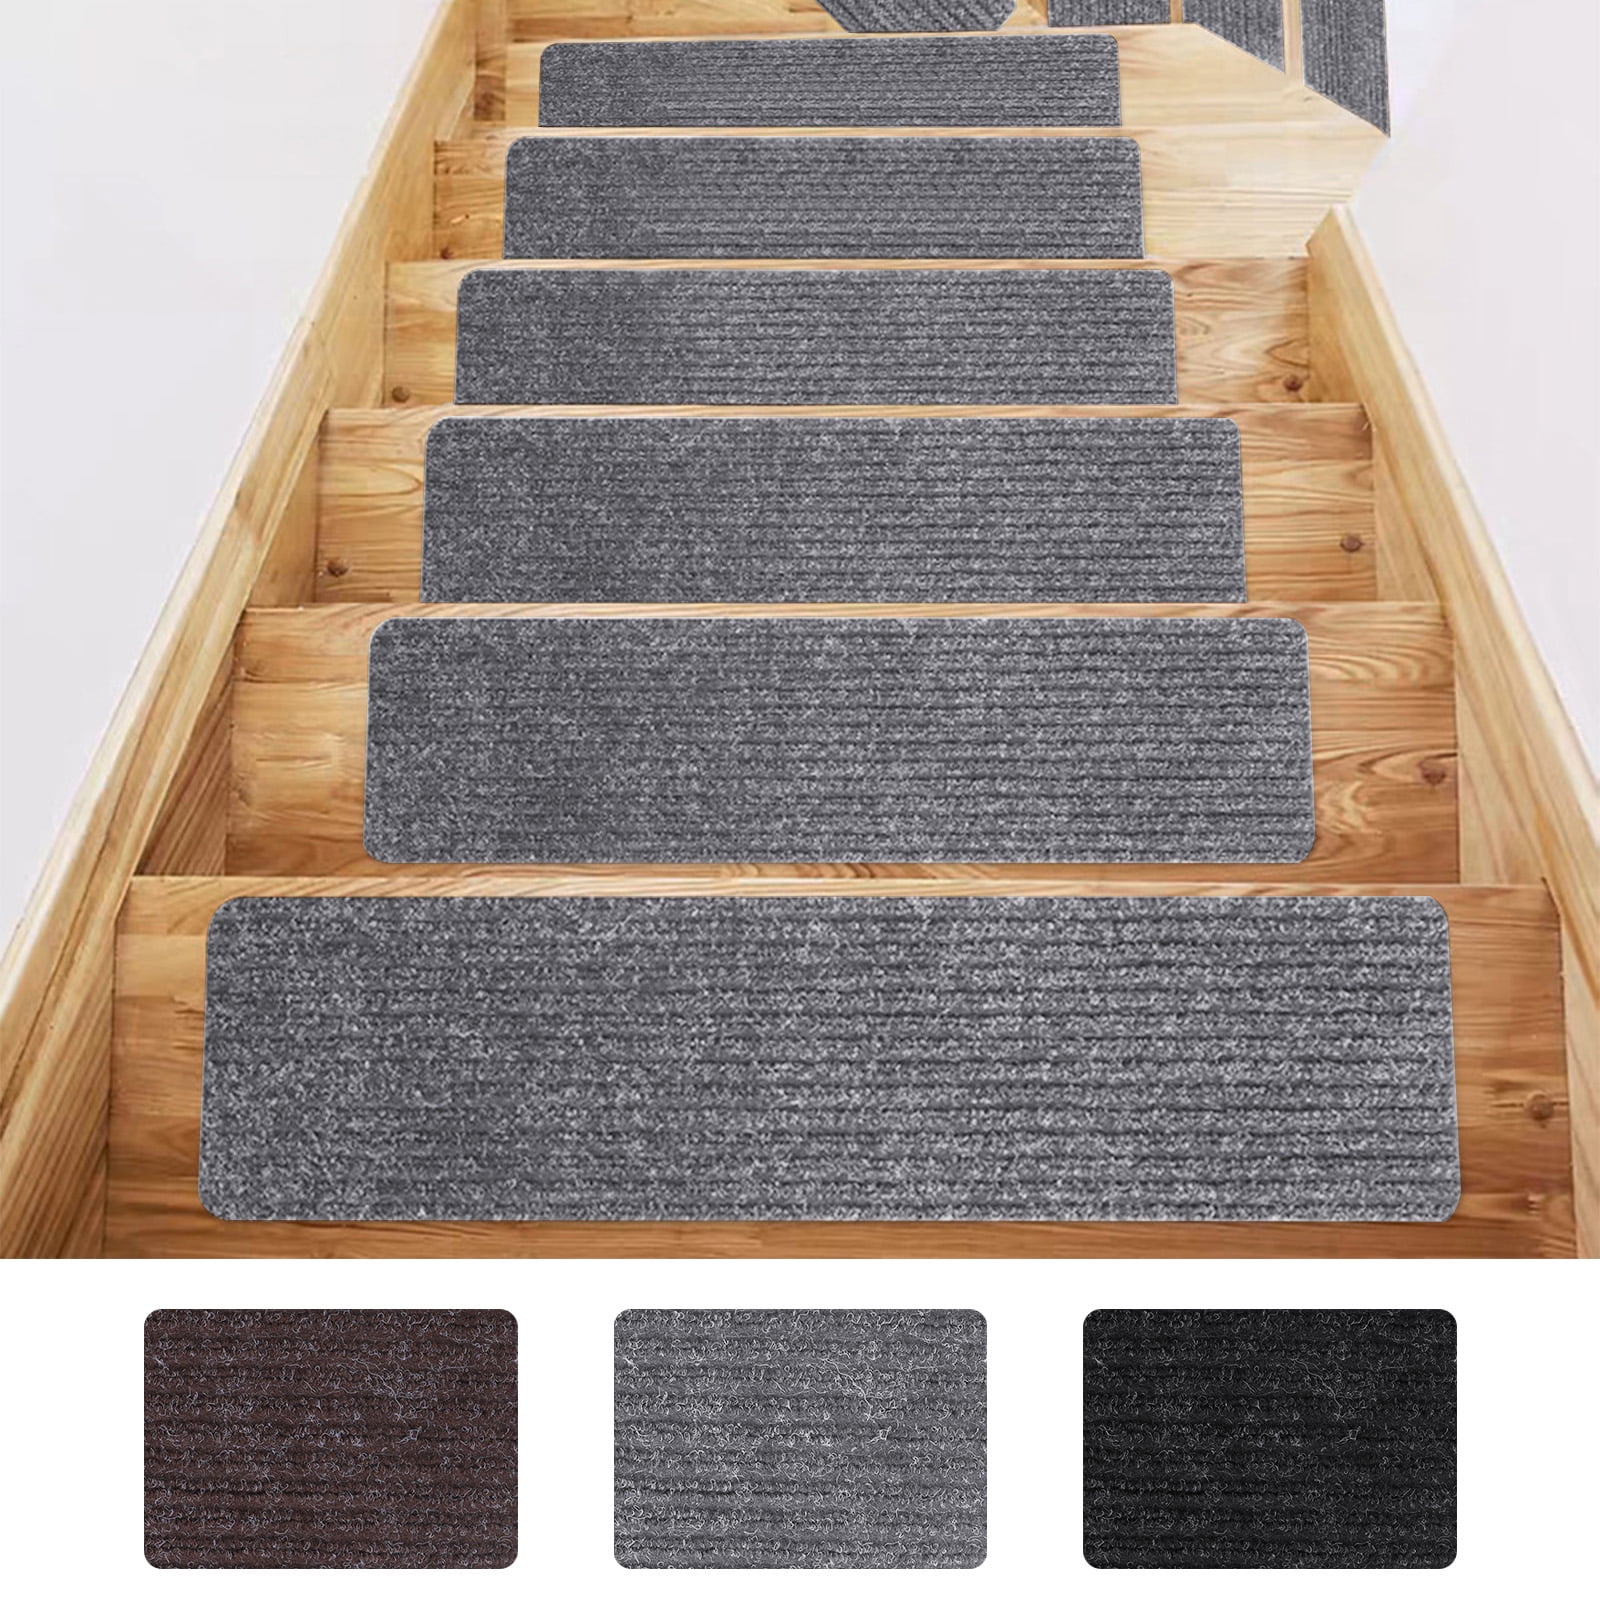 Details about   Set of 15 SKID-RESISTANT Carpet Stair Treads BLACK runner rugs 